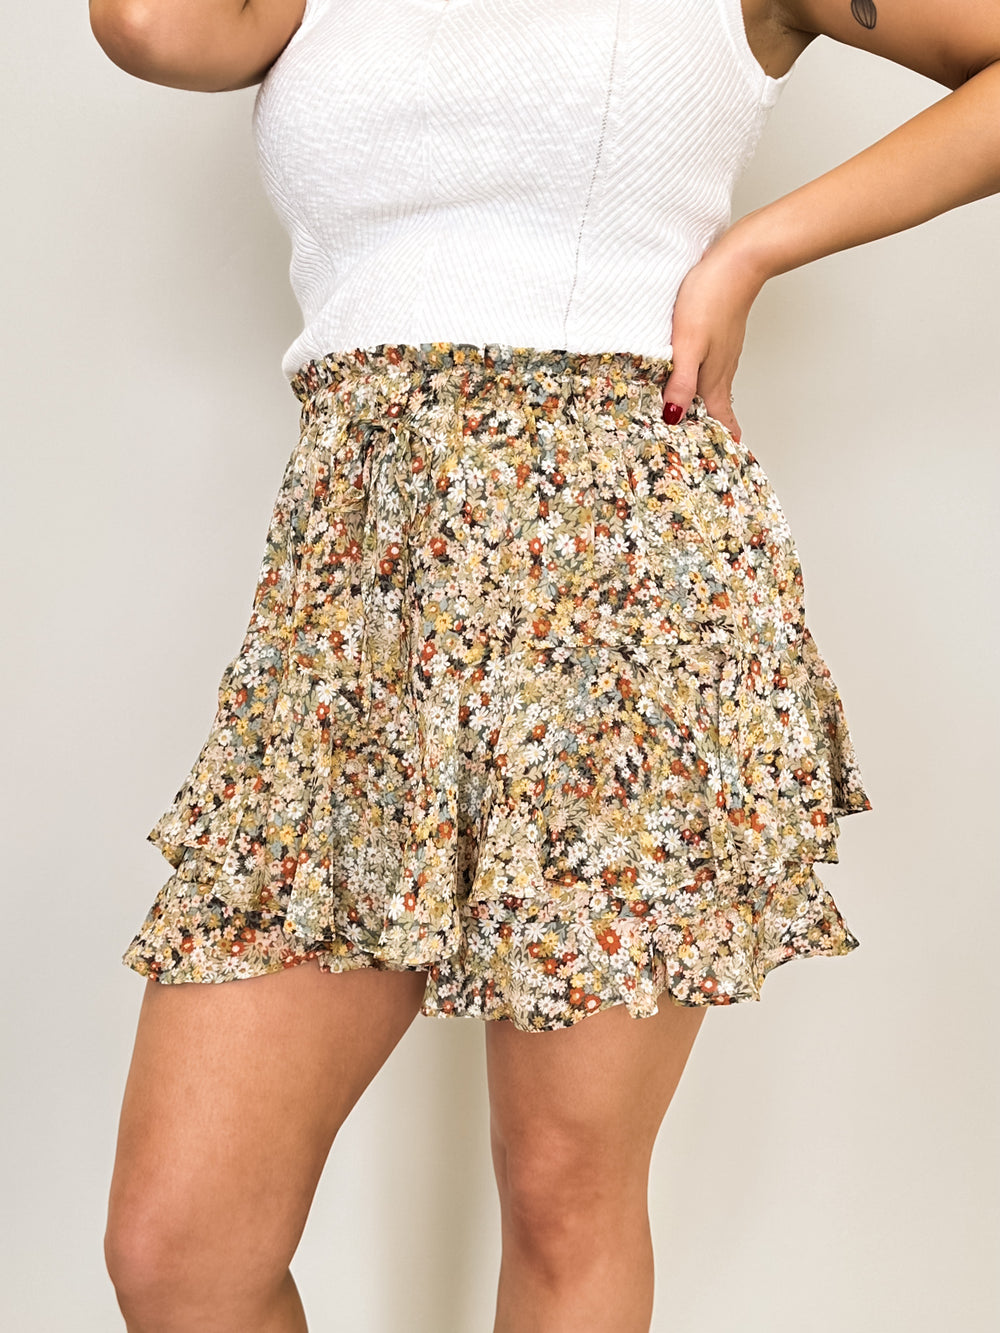 Trying To Find Your Way Skort